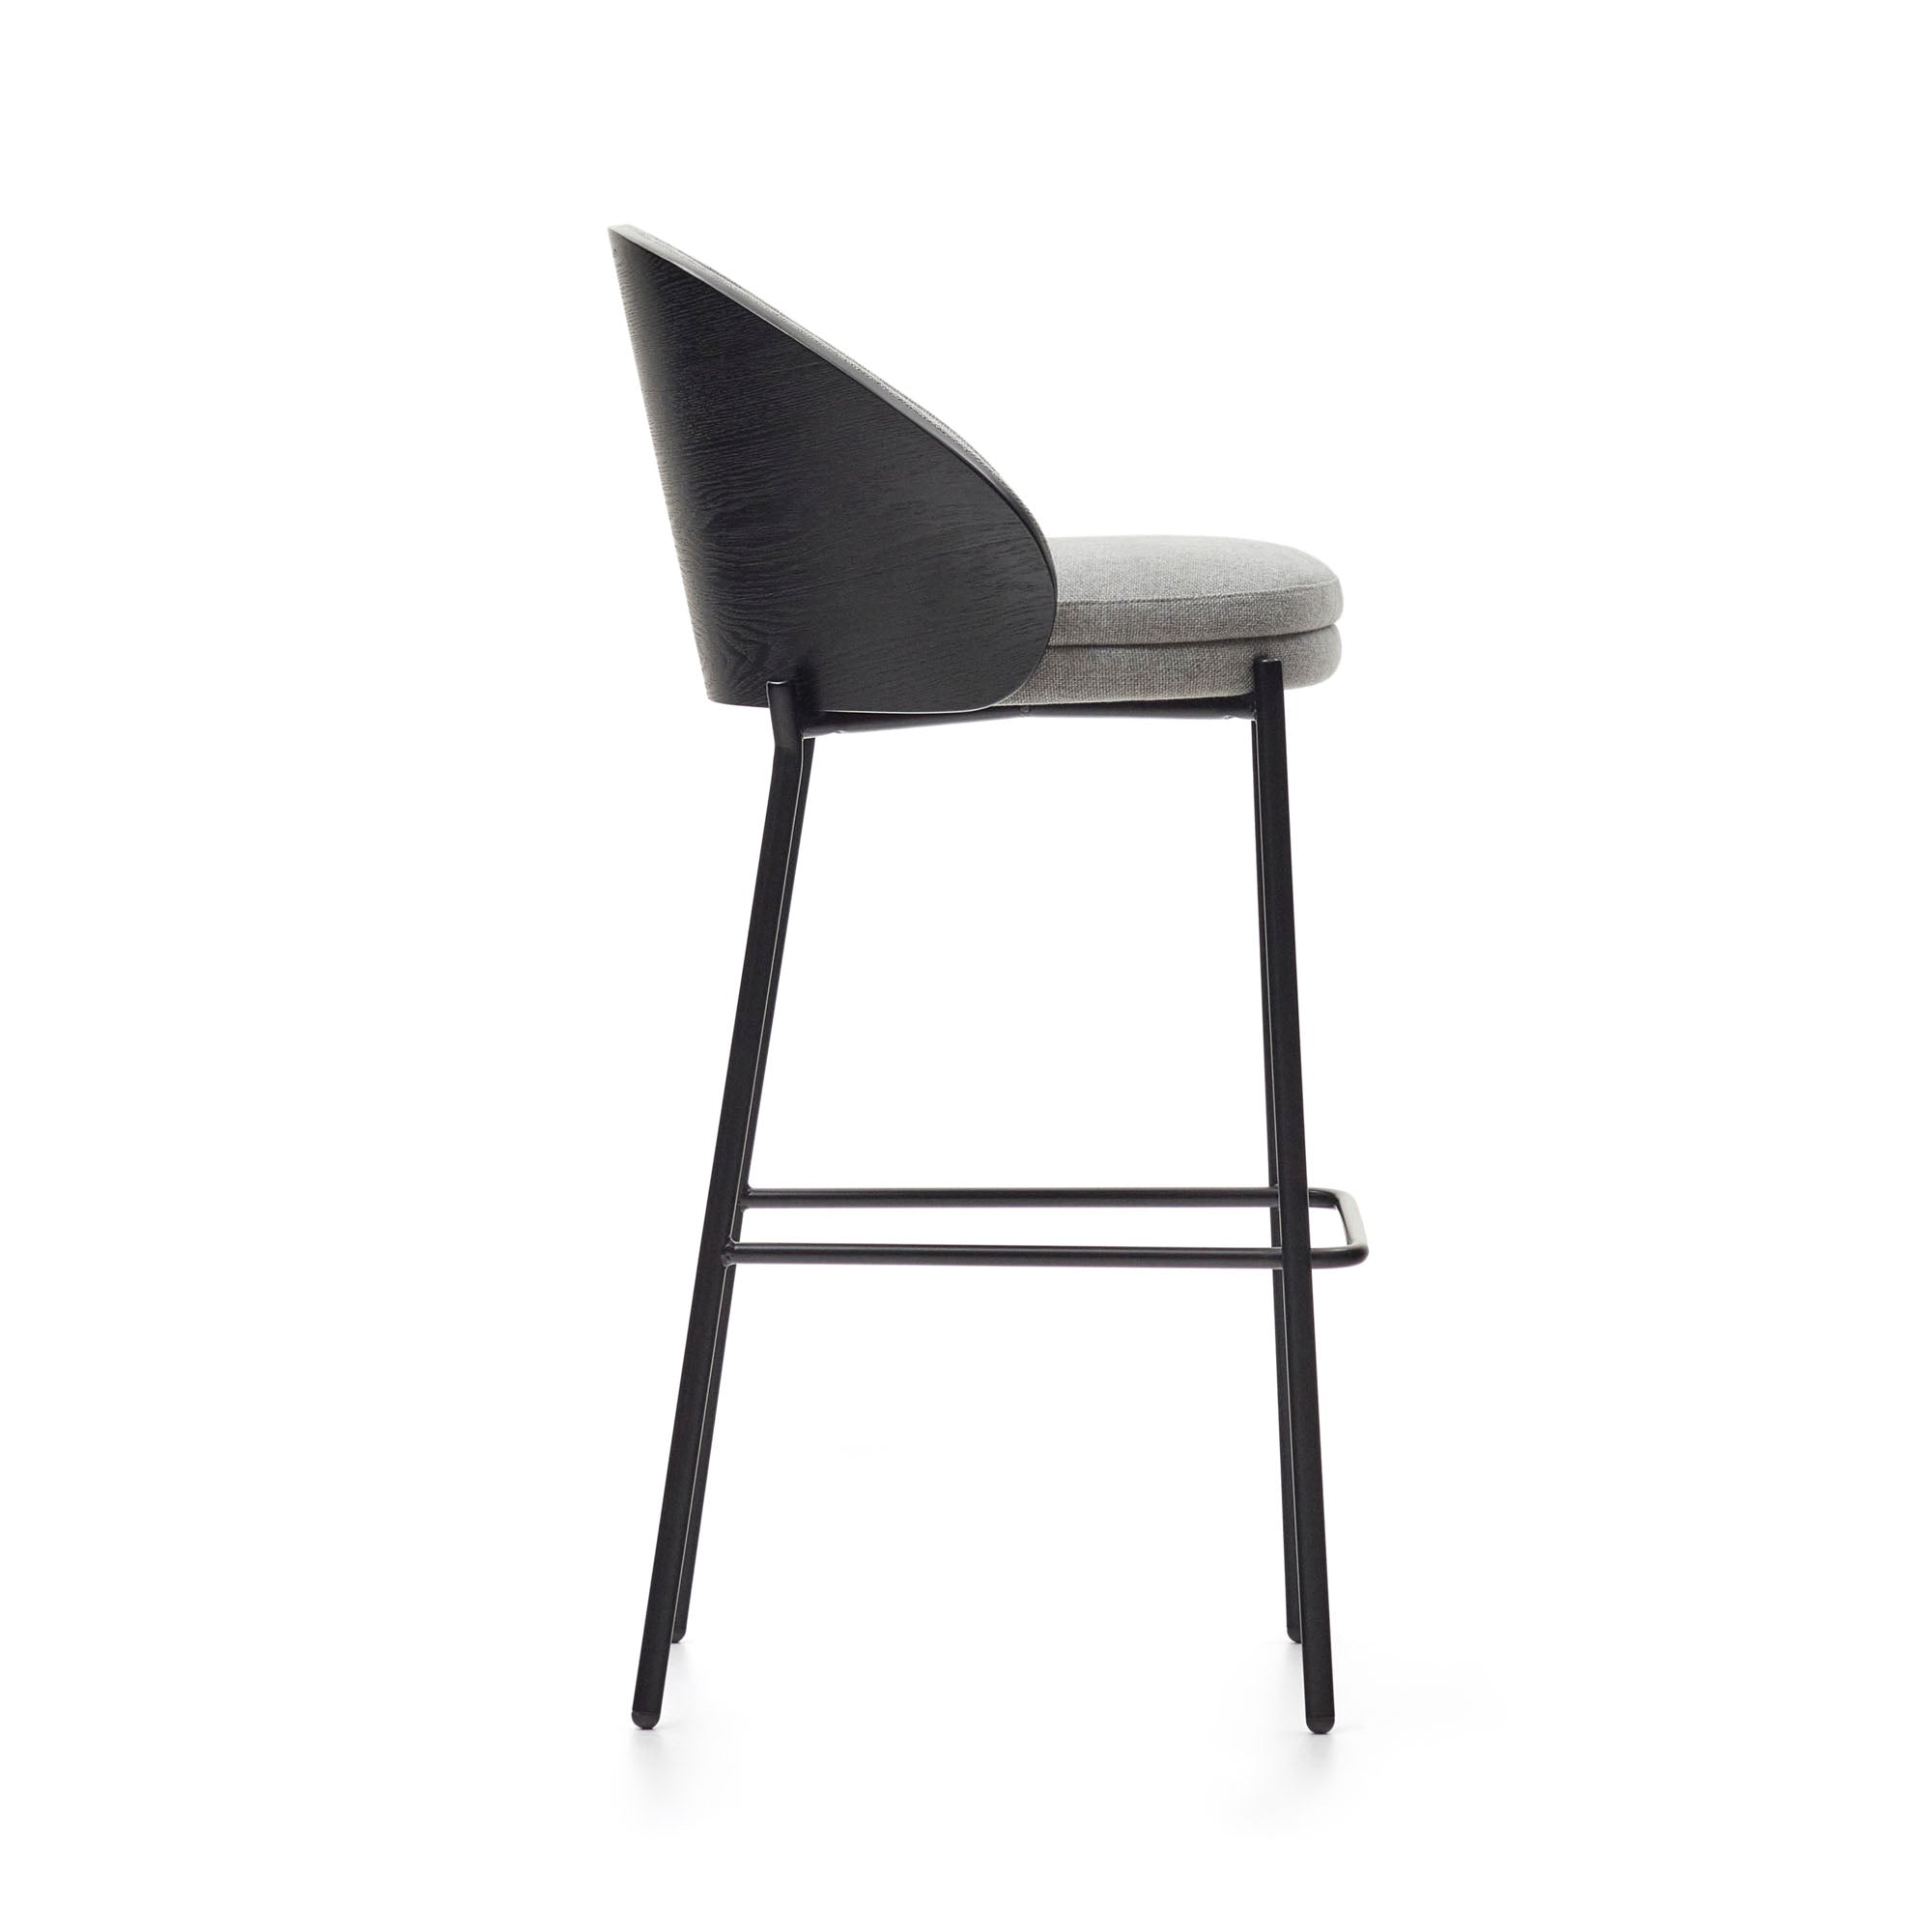 Eamy light grey stool in an ash wood veneer with a black finish and black metal, 75 cm